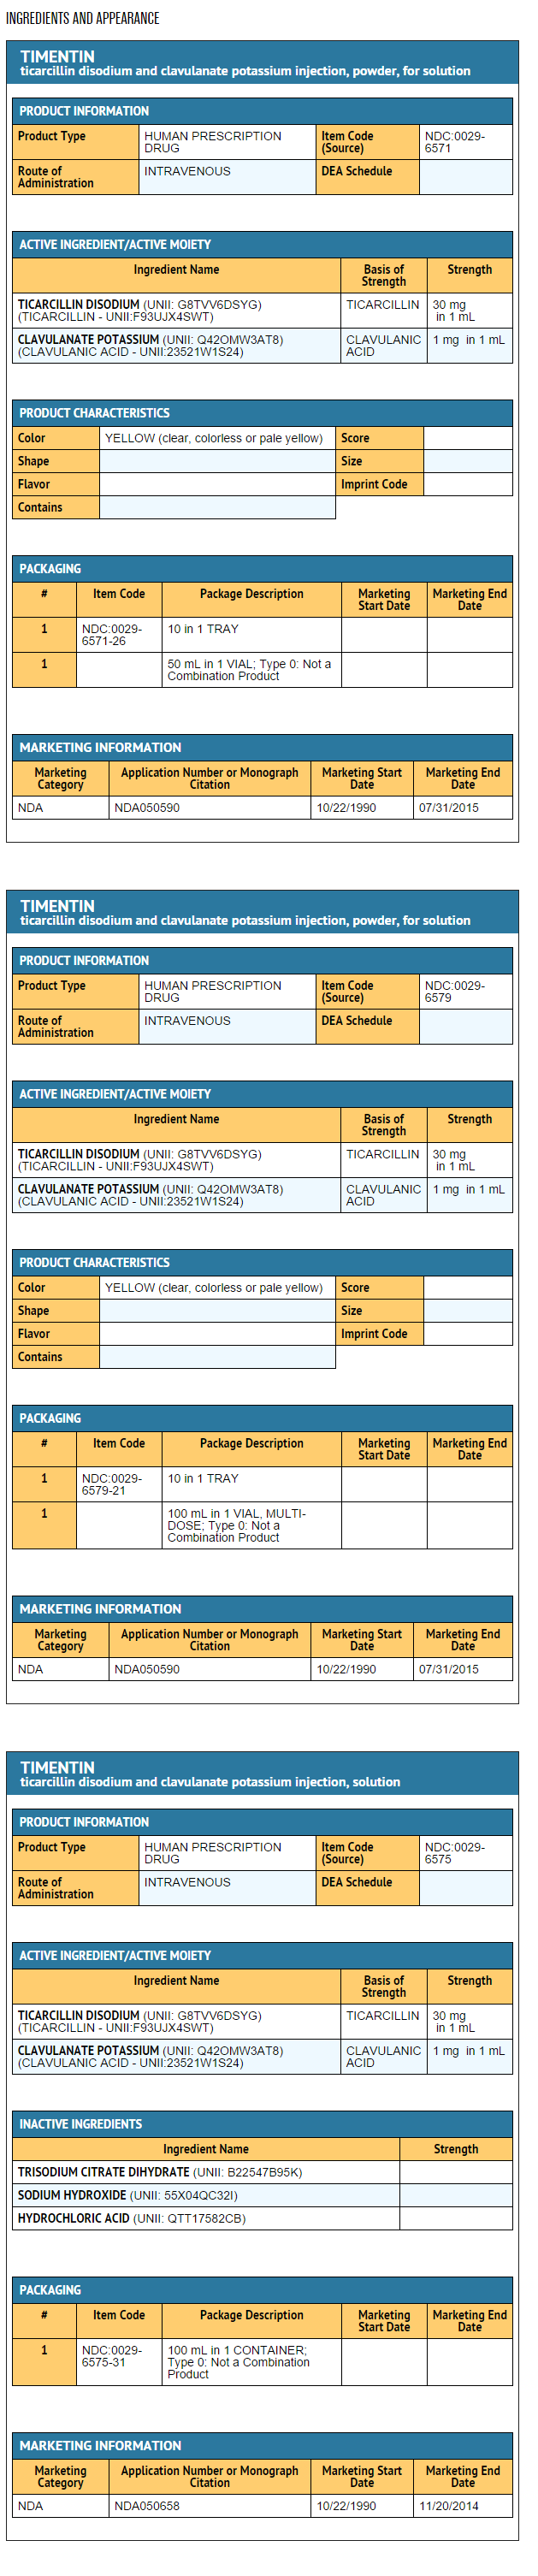 File:Ticarcillin and clavulanate ingredients and appearance.png